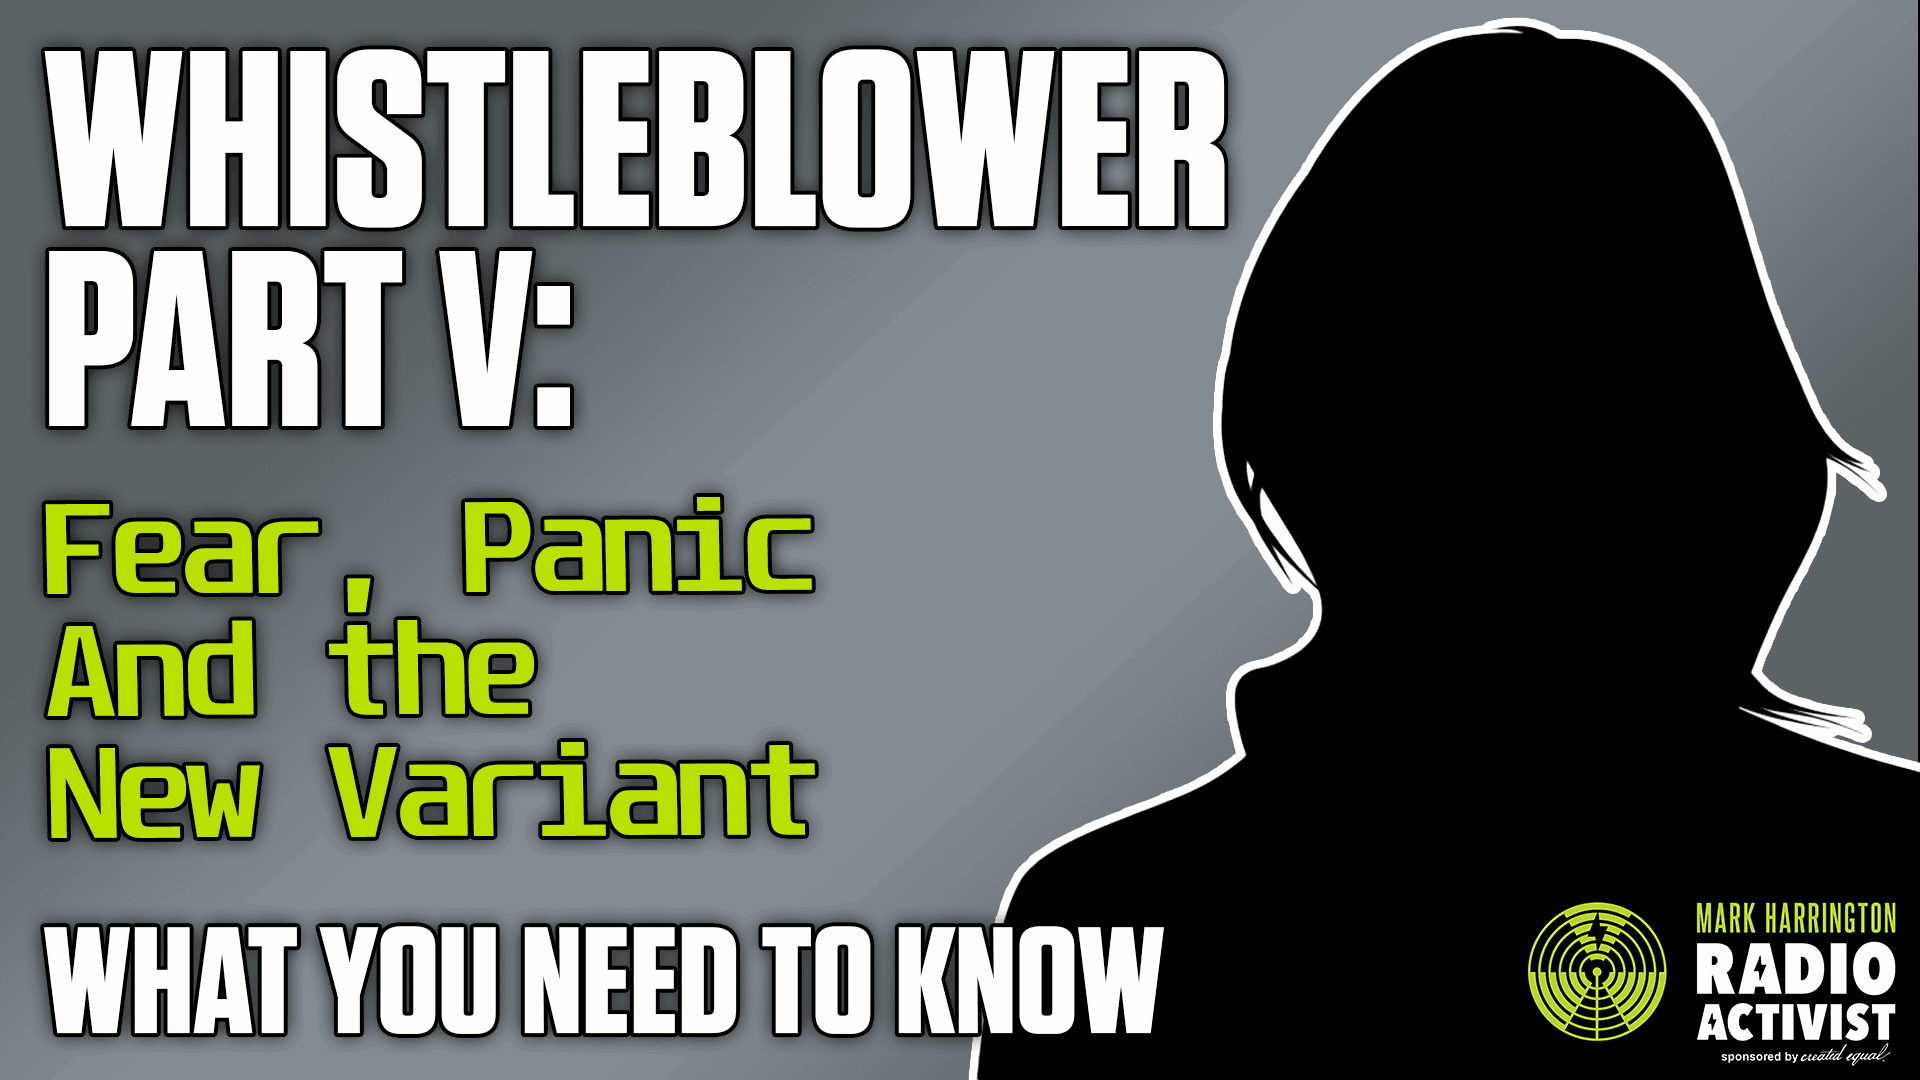 Whistleblower Part V: Fear, Panic, and the New Variant – What You Need to Know